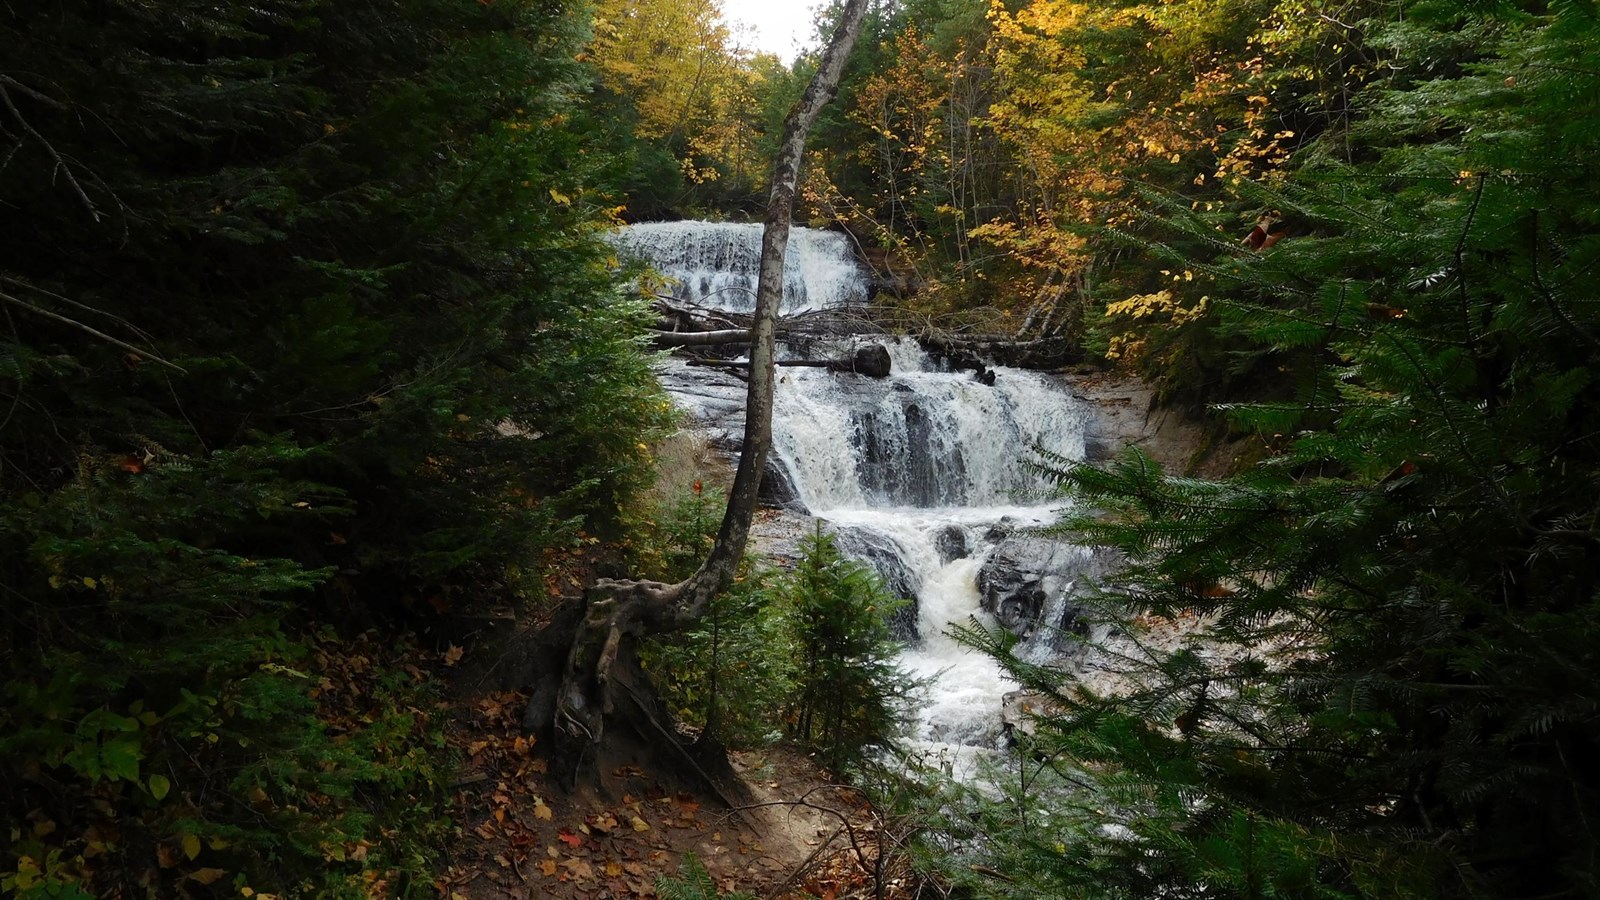 Sable Falls in Fall tumbles 75 feet over a cascading slope of sandstone rock